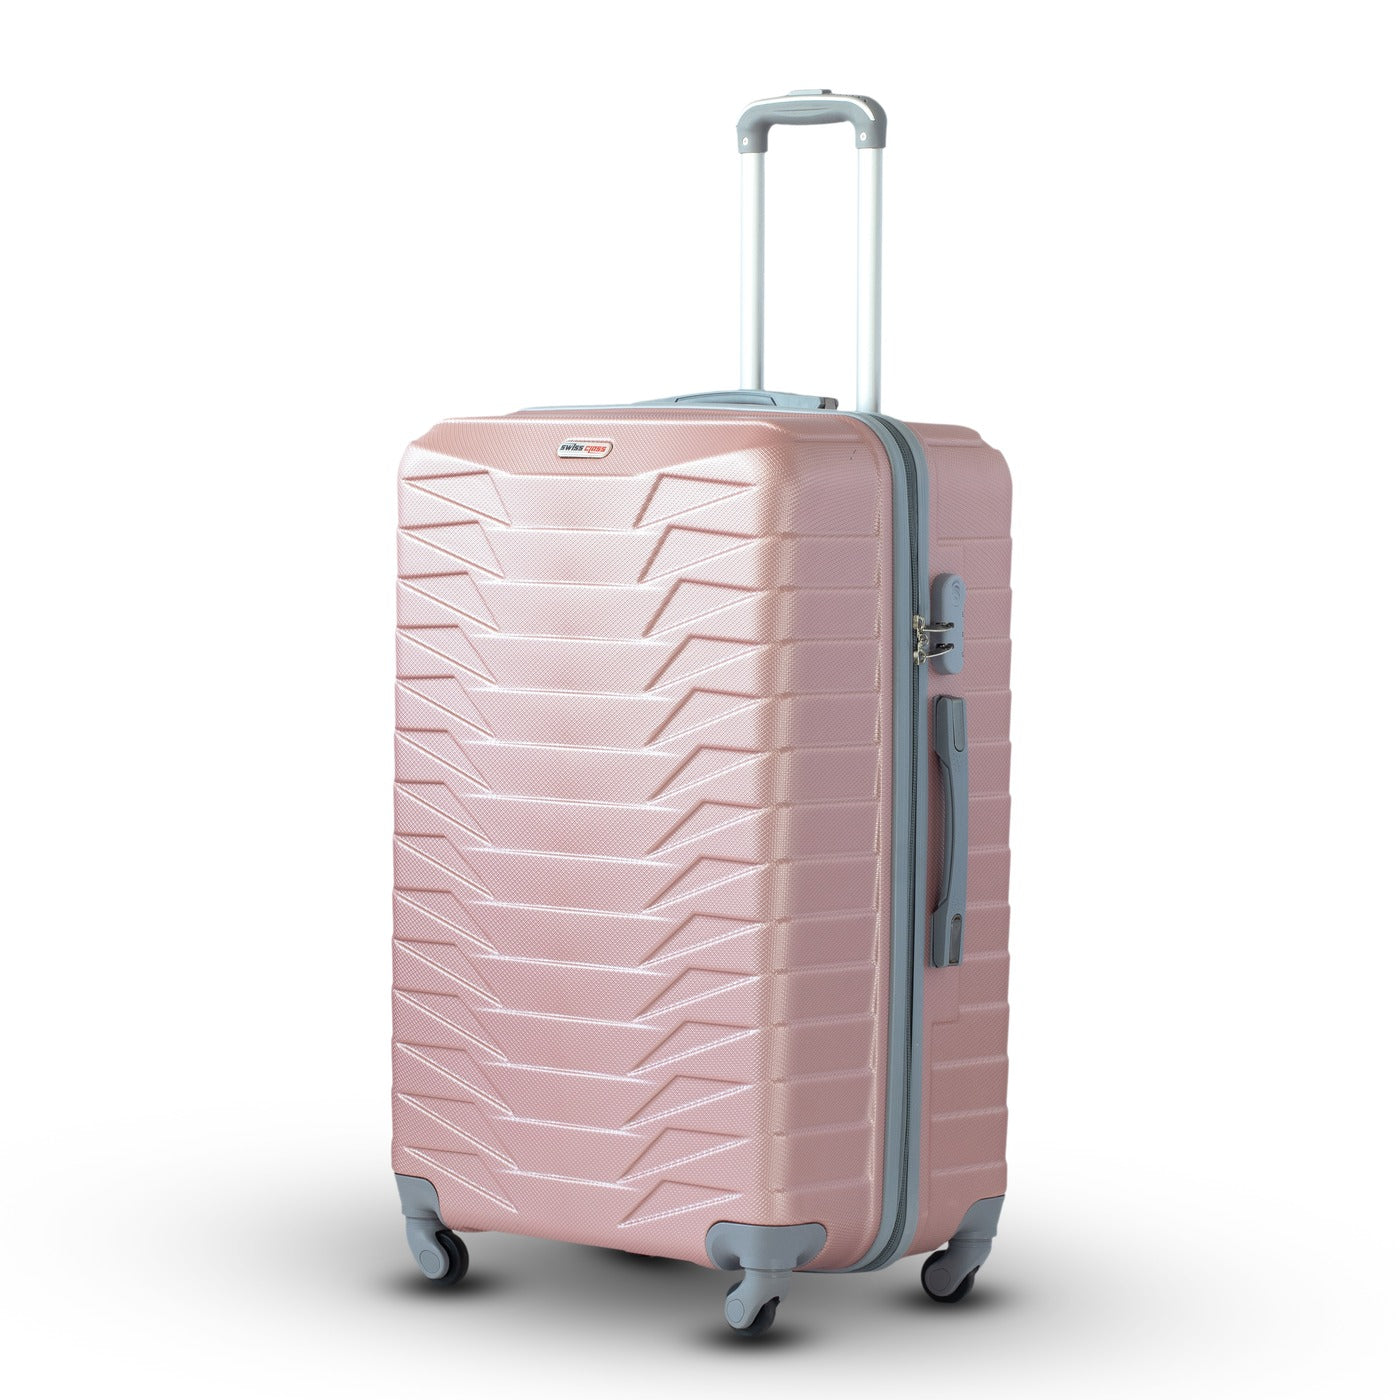 Swiss Class Crocodile ABS Lightweight rose gold Luggage Bag With Spinner Wheel Zaappy